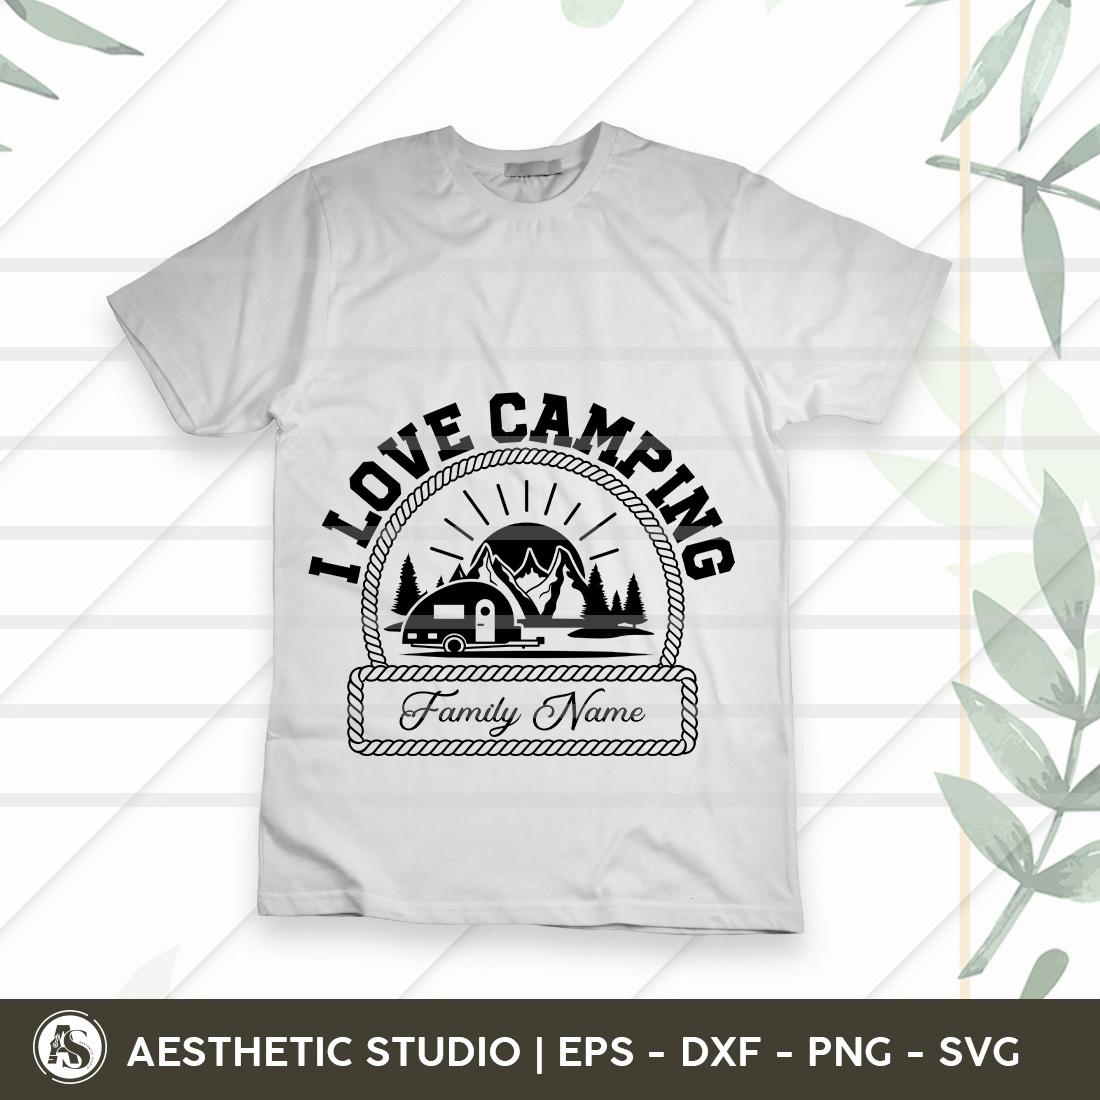 Camping Bundle, I love Camping, Camp Life, We Love Camping, This Is My Happy Place, Keep Calm And Camp On, Camping Svg, SVG, Camping Quotes, Camping Bundle design, Svg, Eps, Dxf, Png, Cut file preview image.